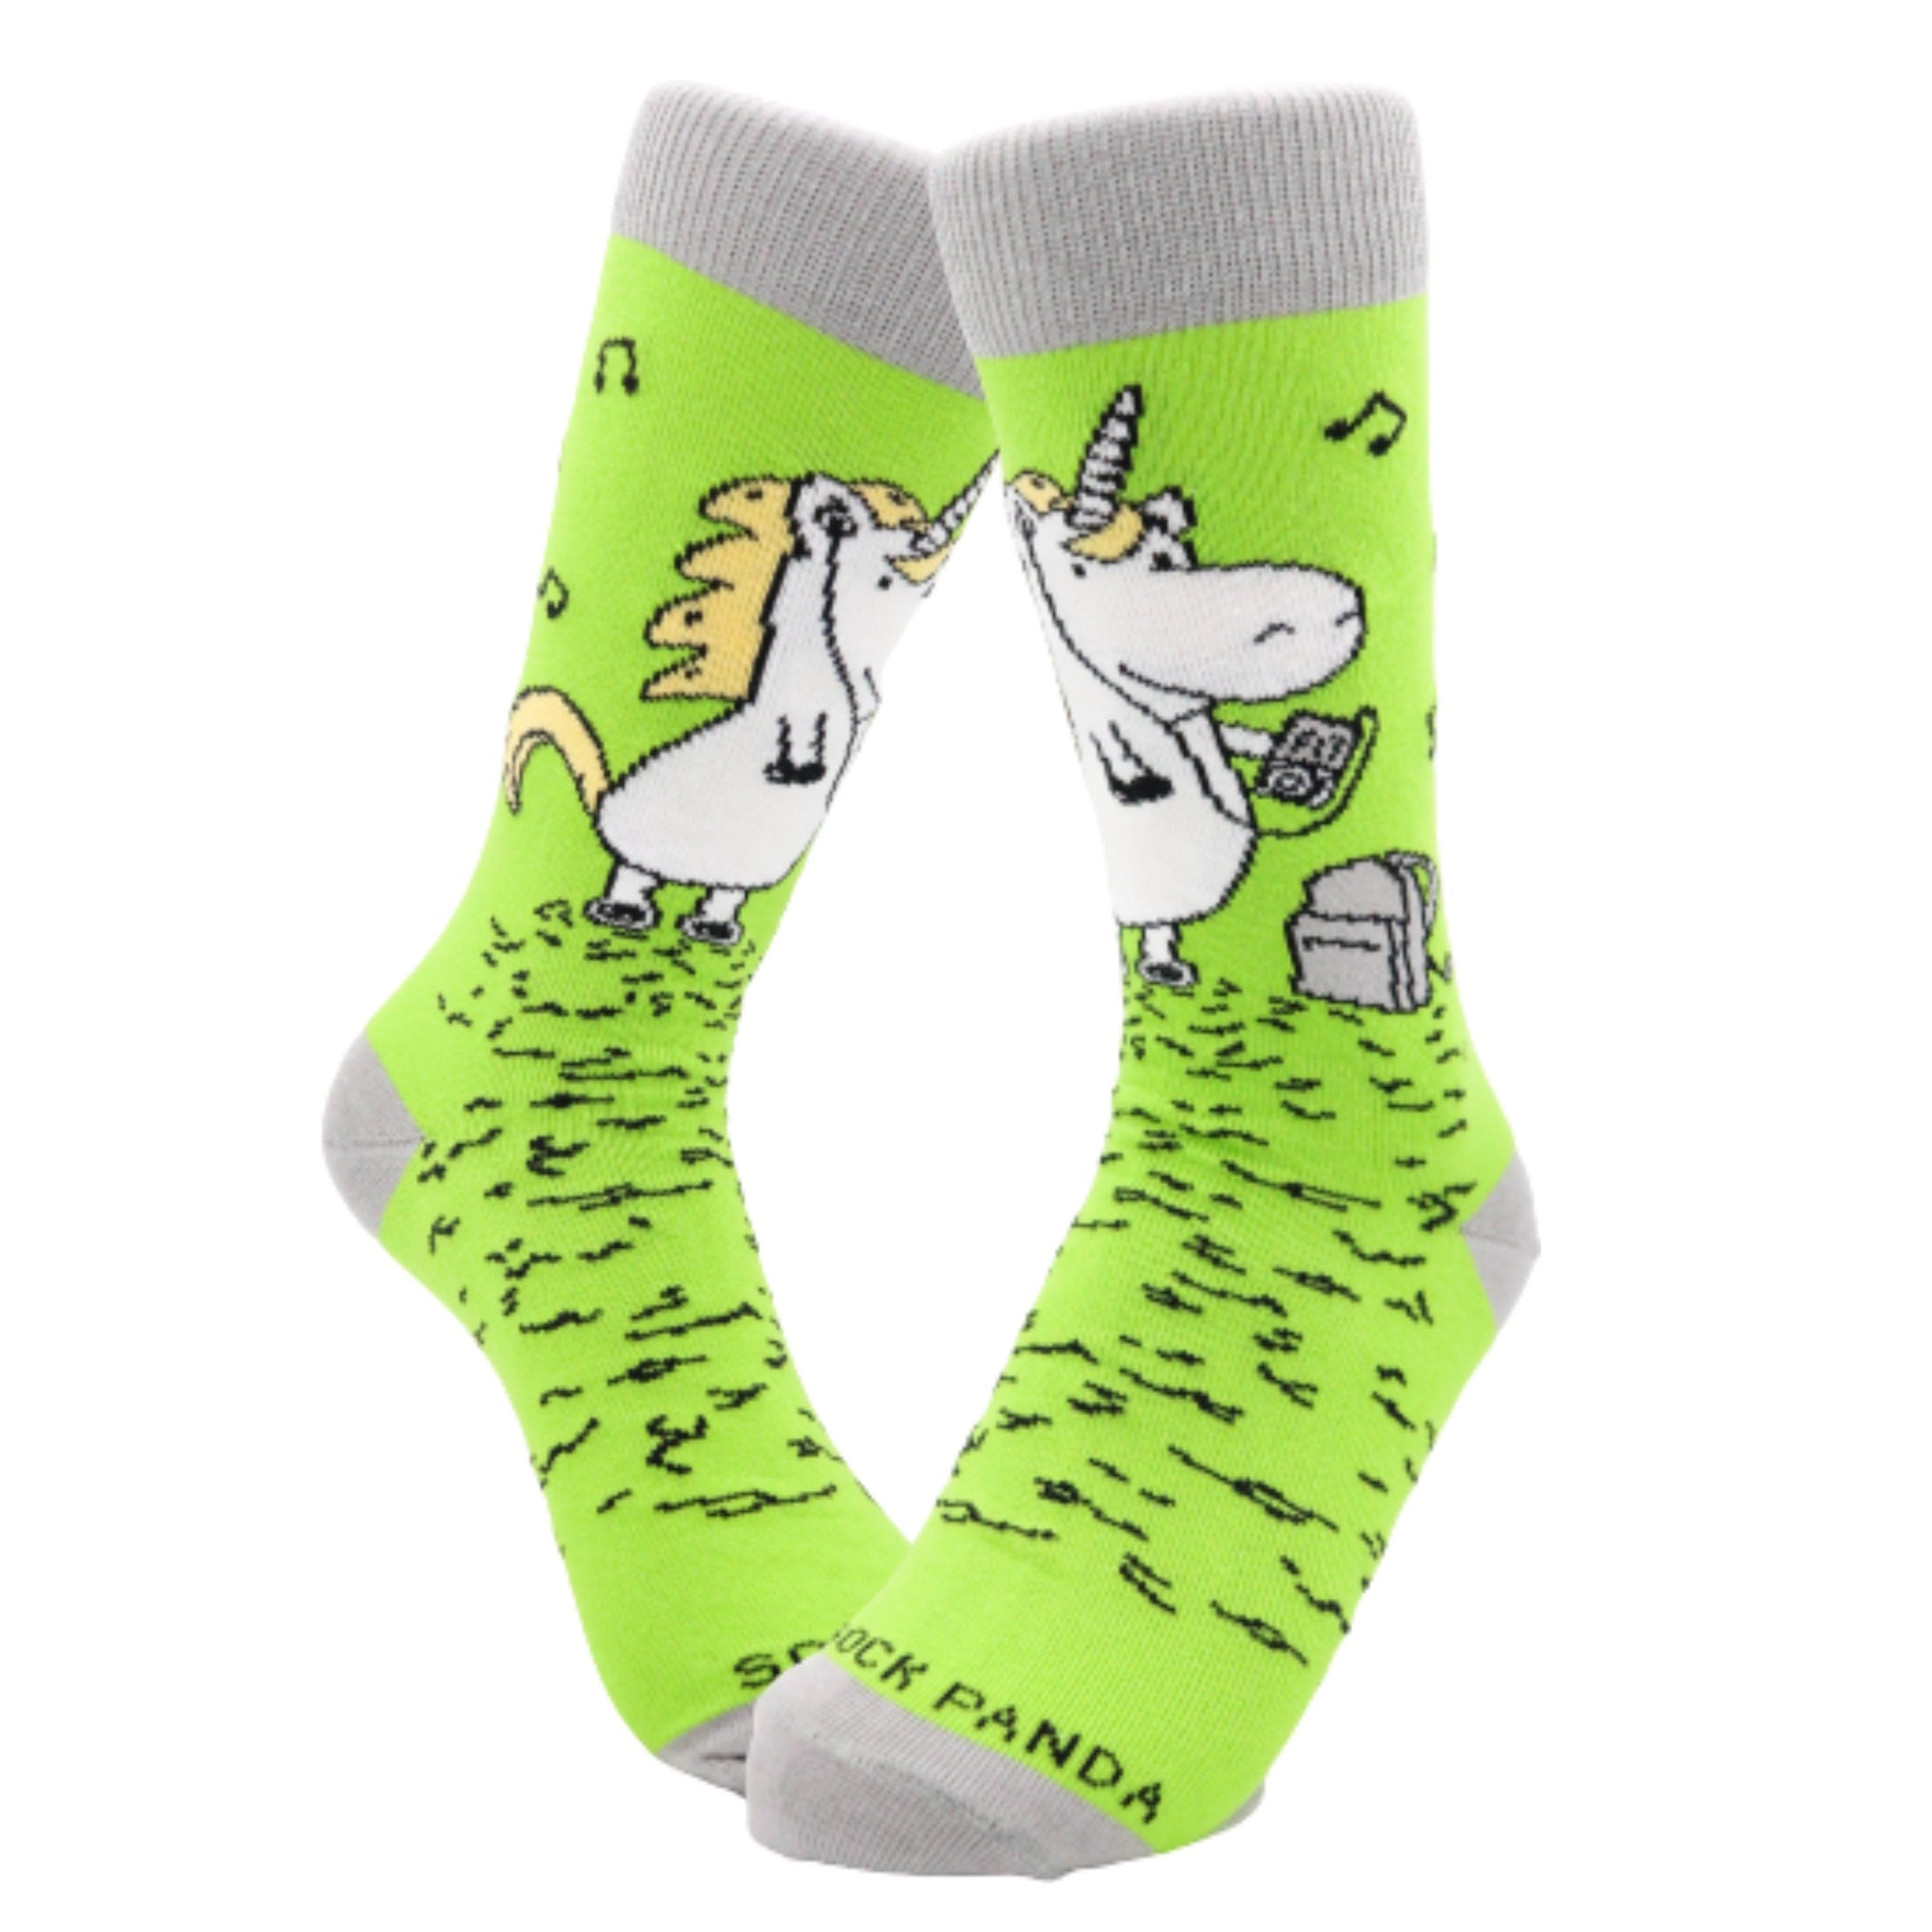 Groovy Musical Unicorn Sock from the Sock Panda (Adult Small)